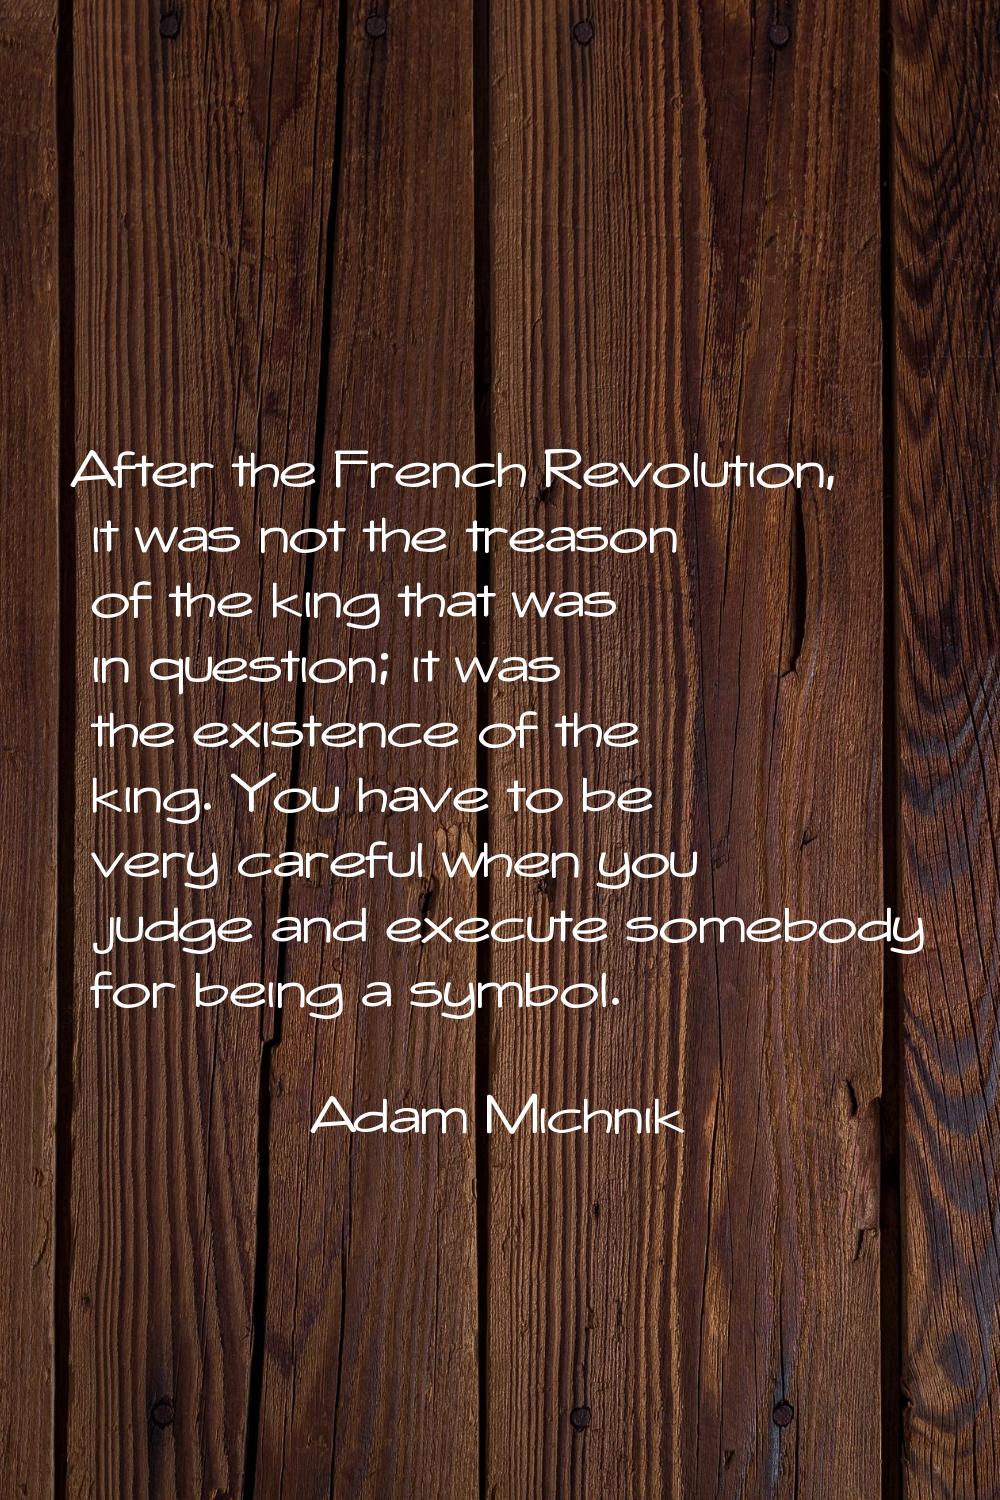 After the French Revolution, it was not the treason of the king that was in question; it was the ex